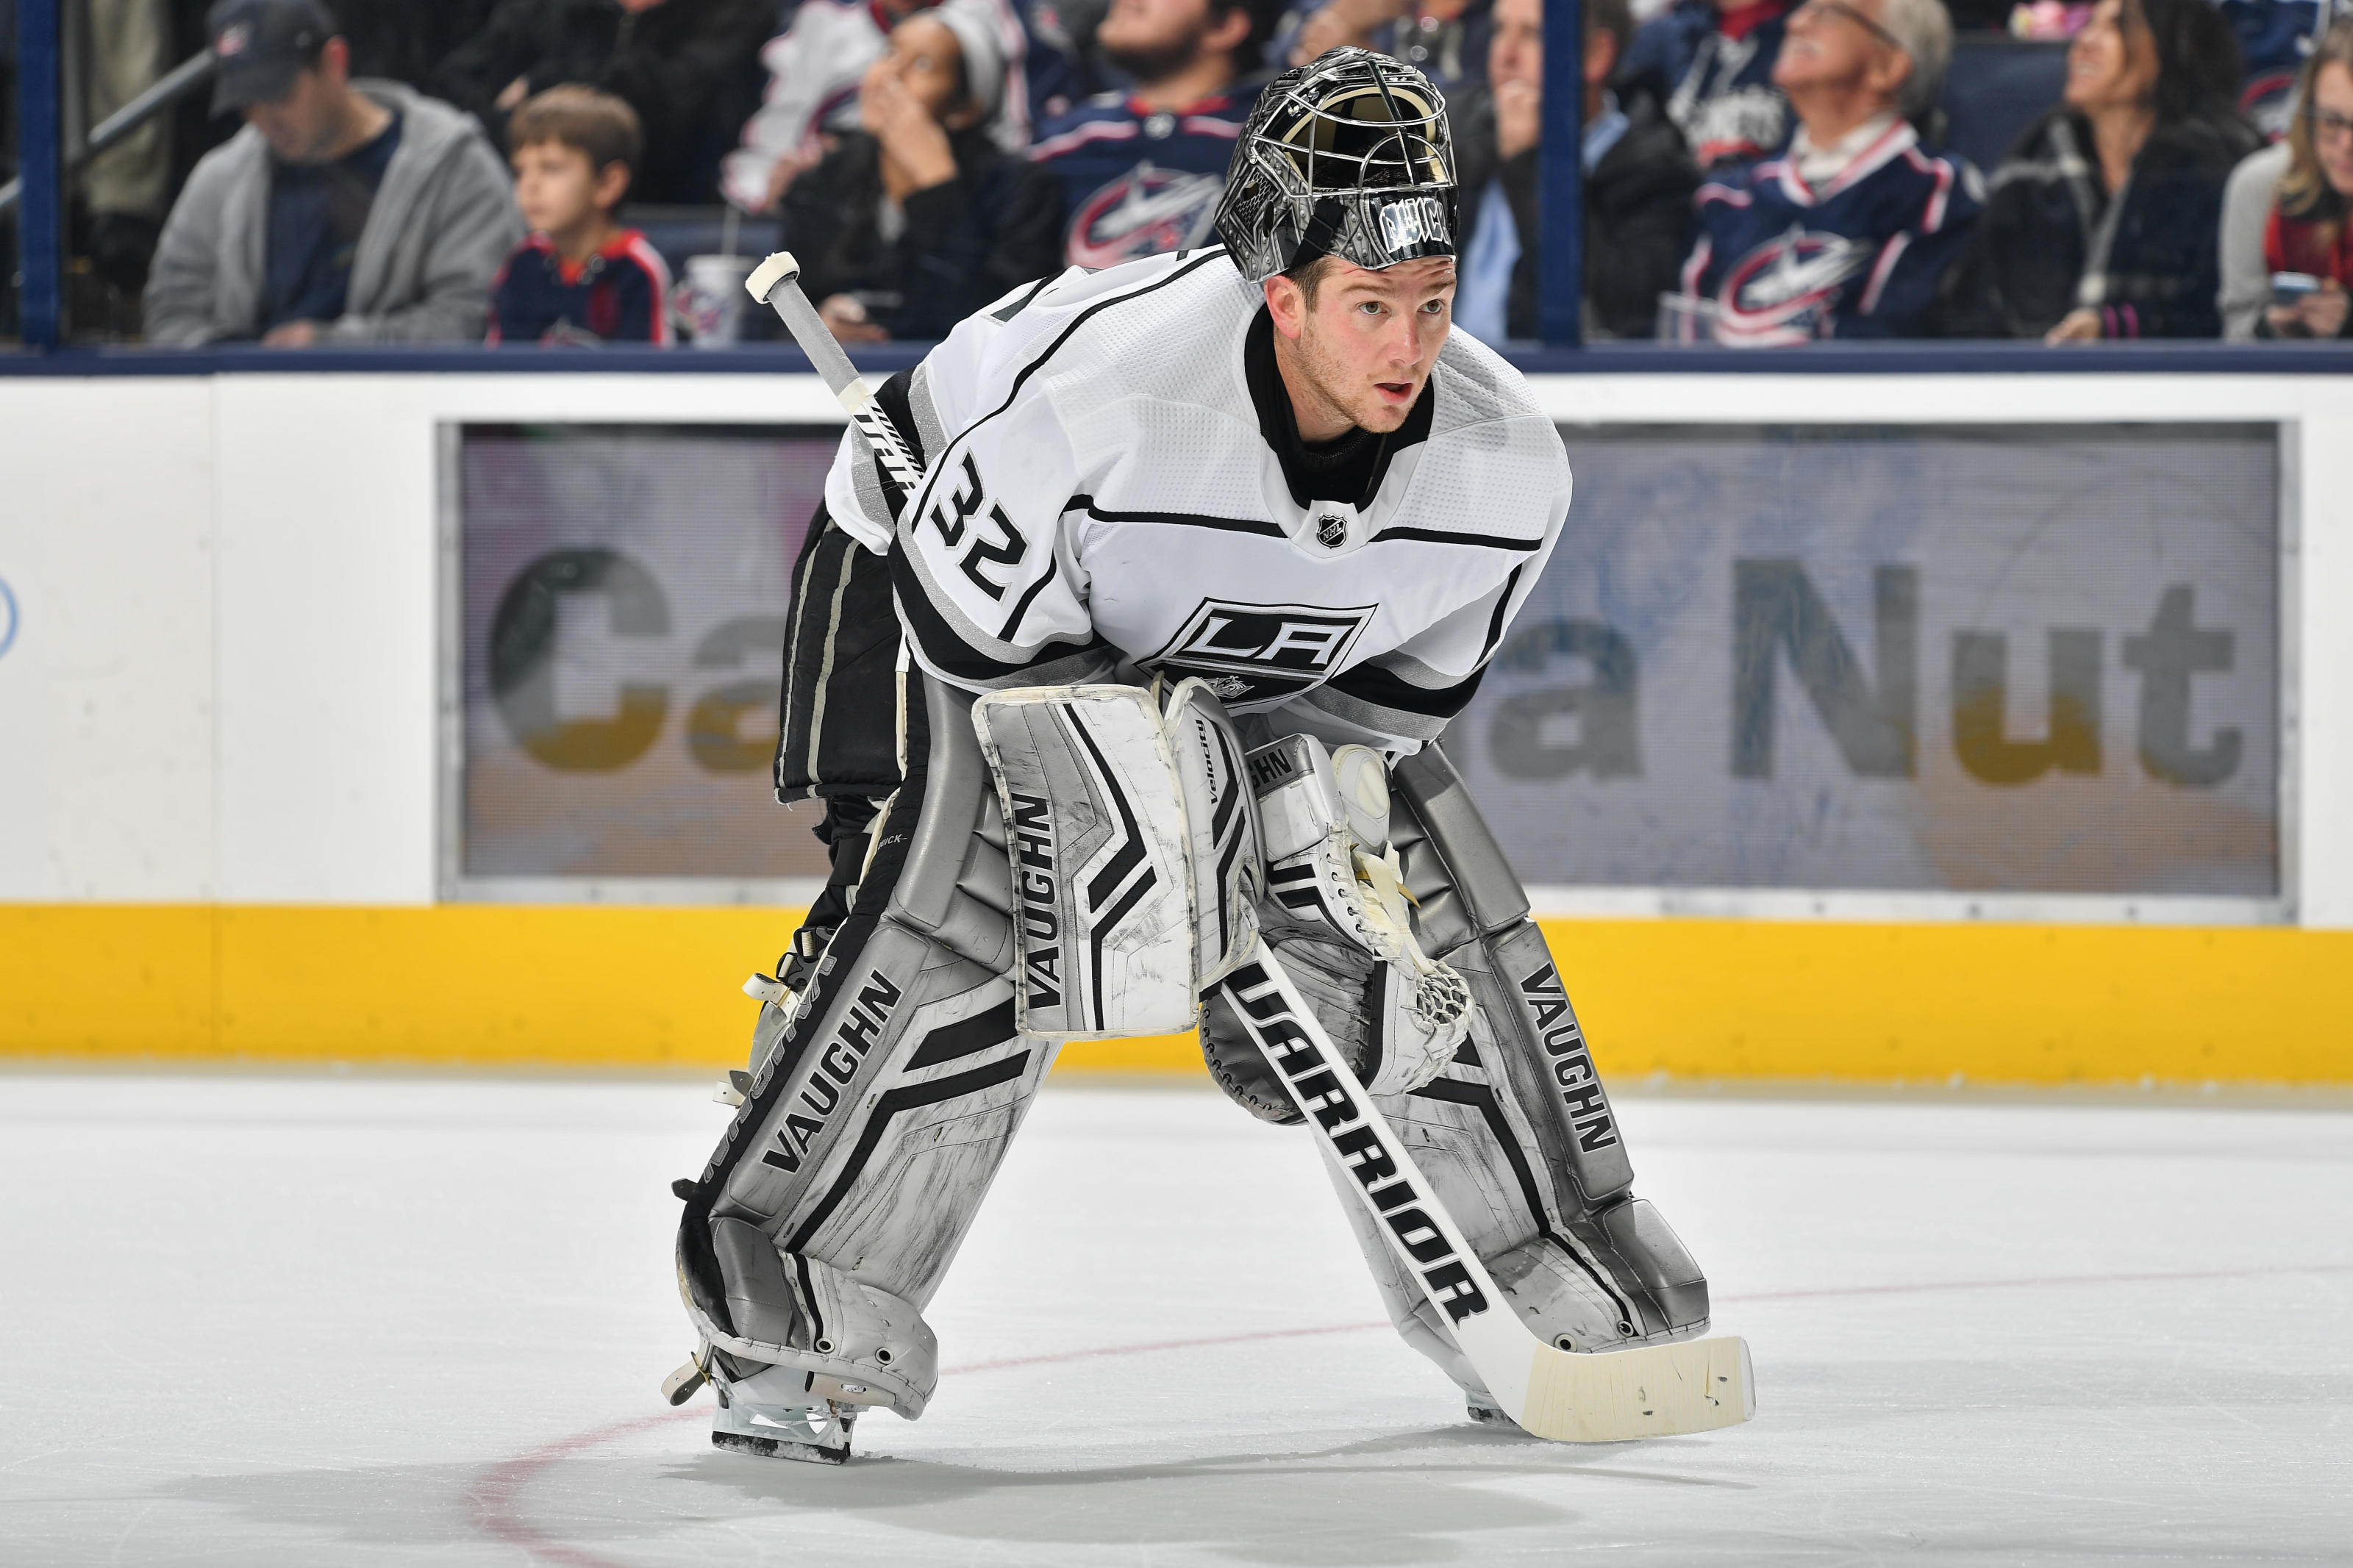 NHL Jonathan Quick LA Kings 2014 Stanley Cup Game 2 Action Photo